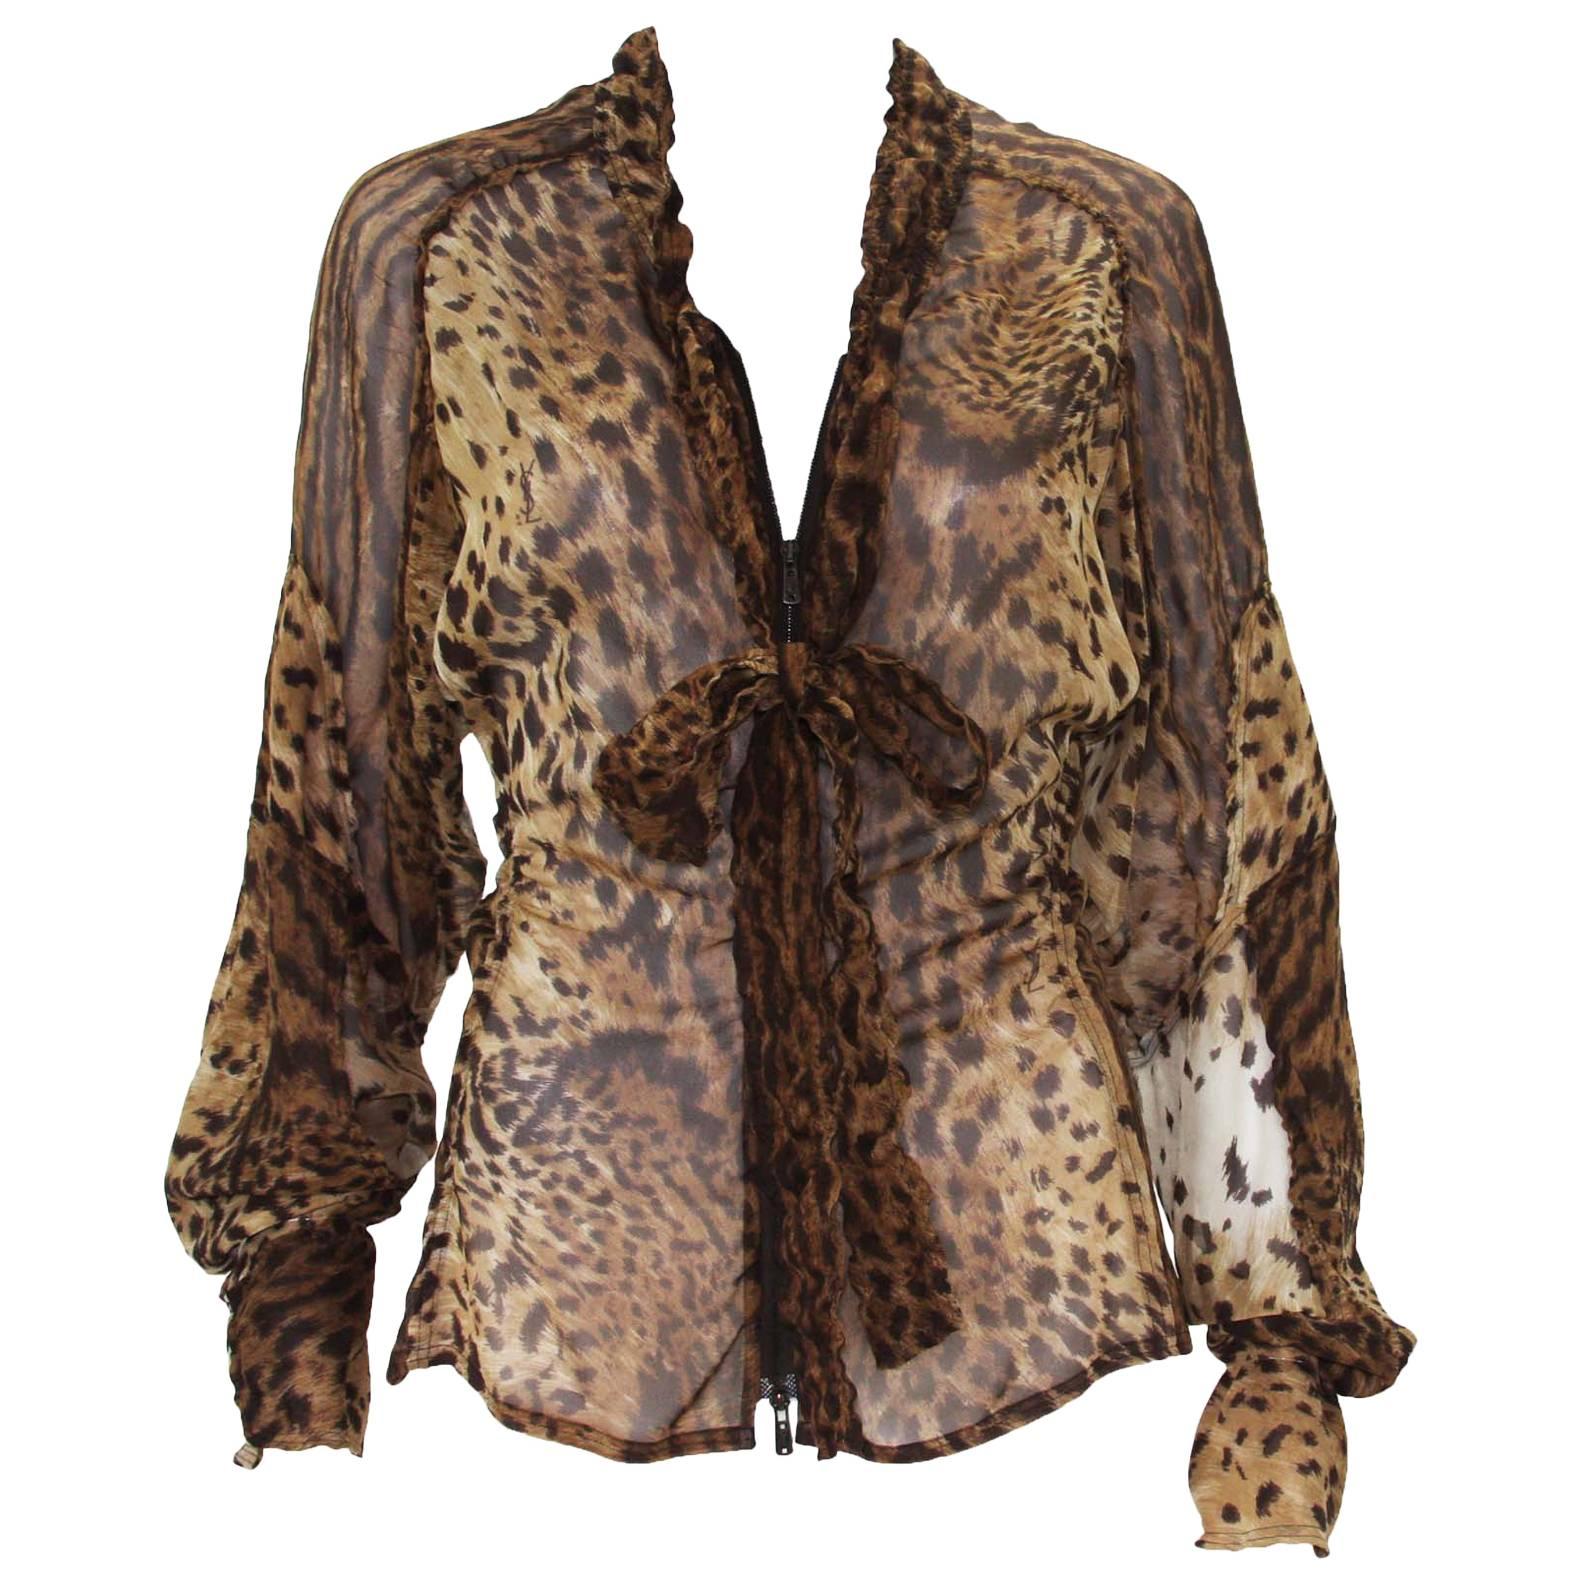 Tom Ford for Yves Saint Laurent S/S 2002 Safari Collection Leopard Silk Top F 38